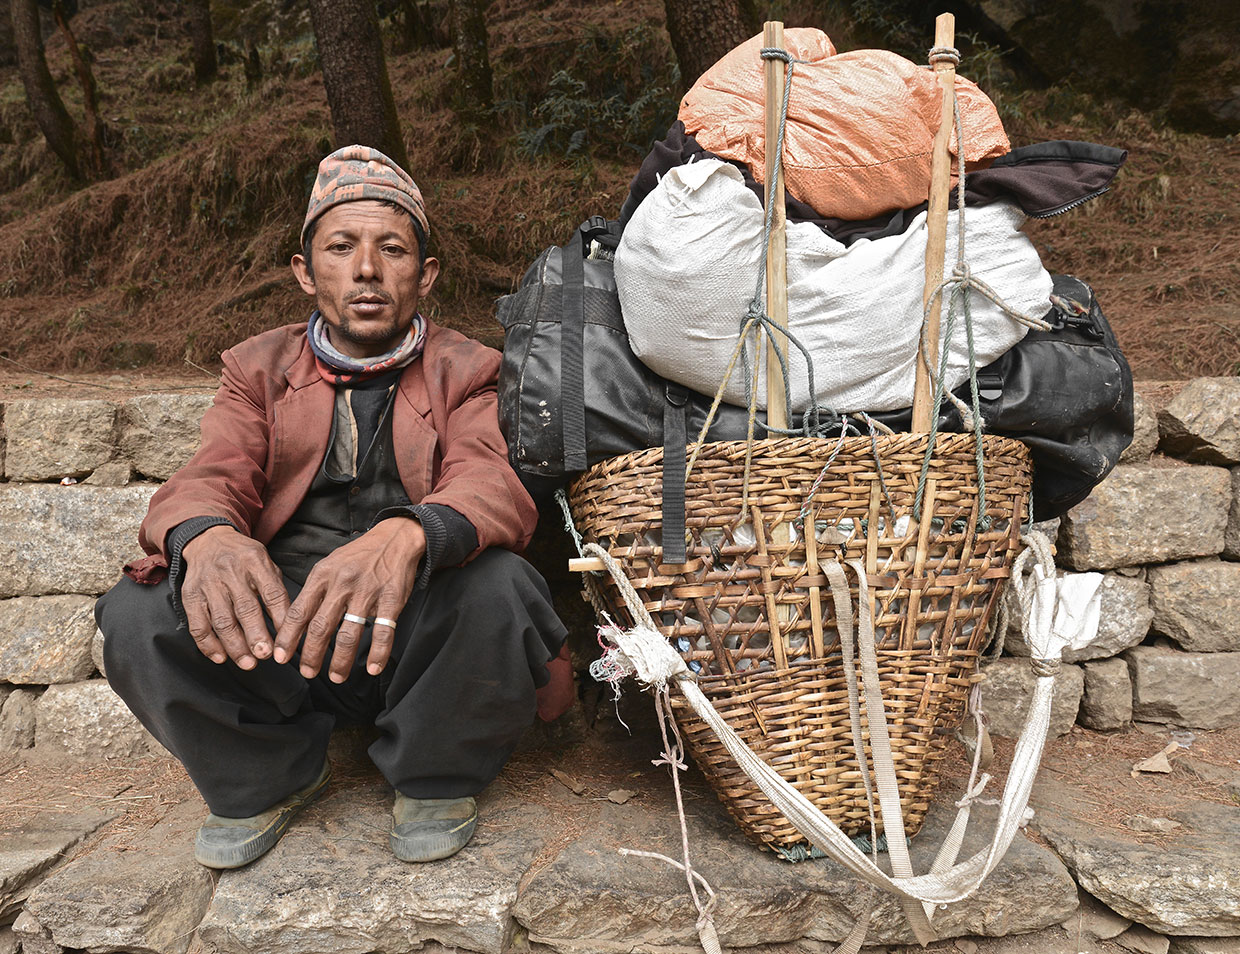 iPorter - Walking with the high altitude porters in the Himalayas